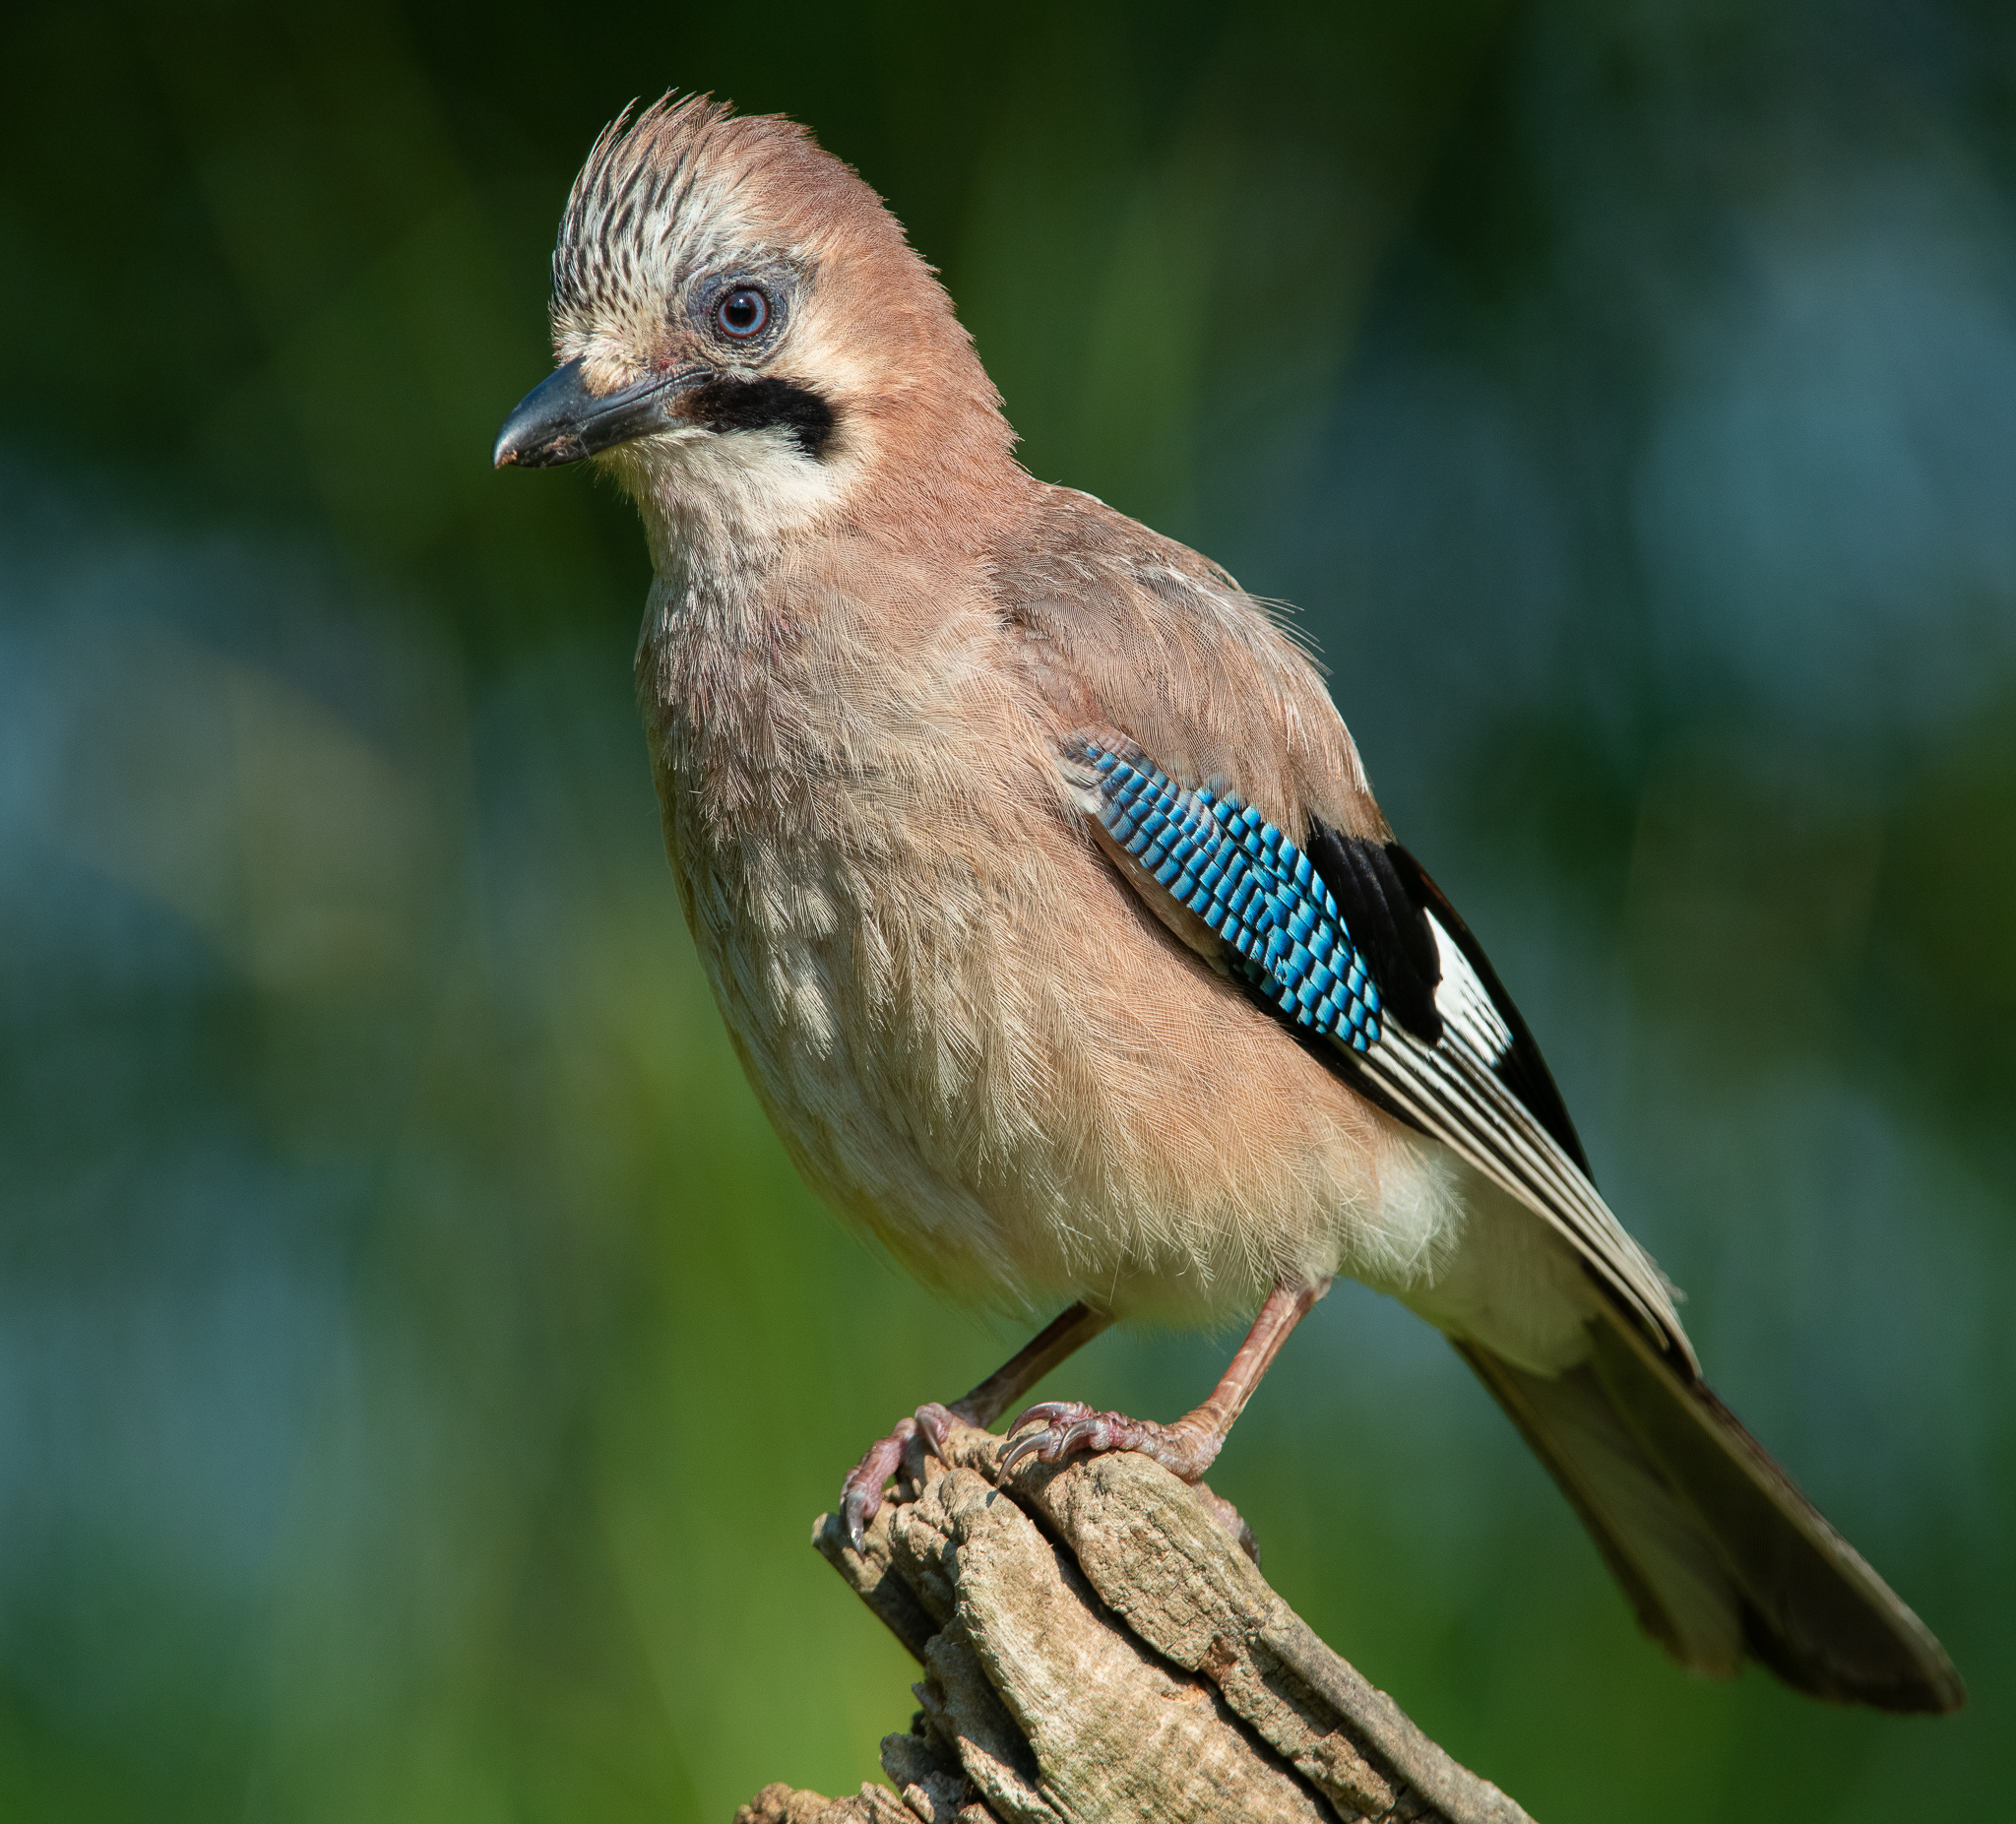 Jay in the early hours of the morning...